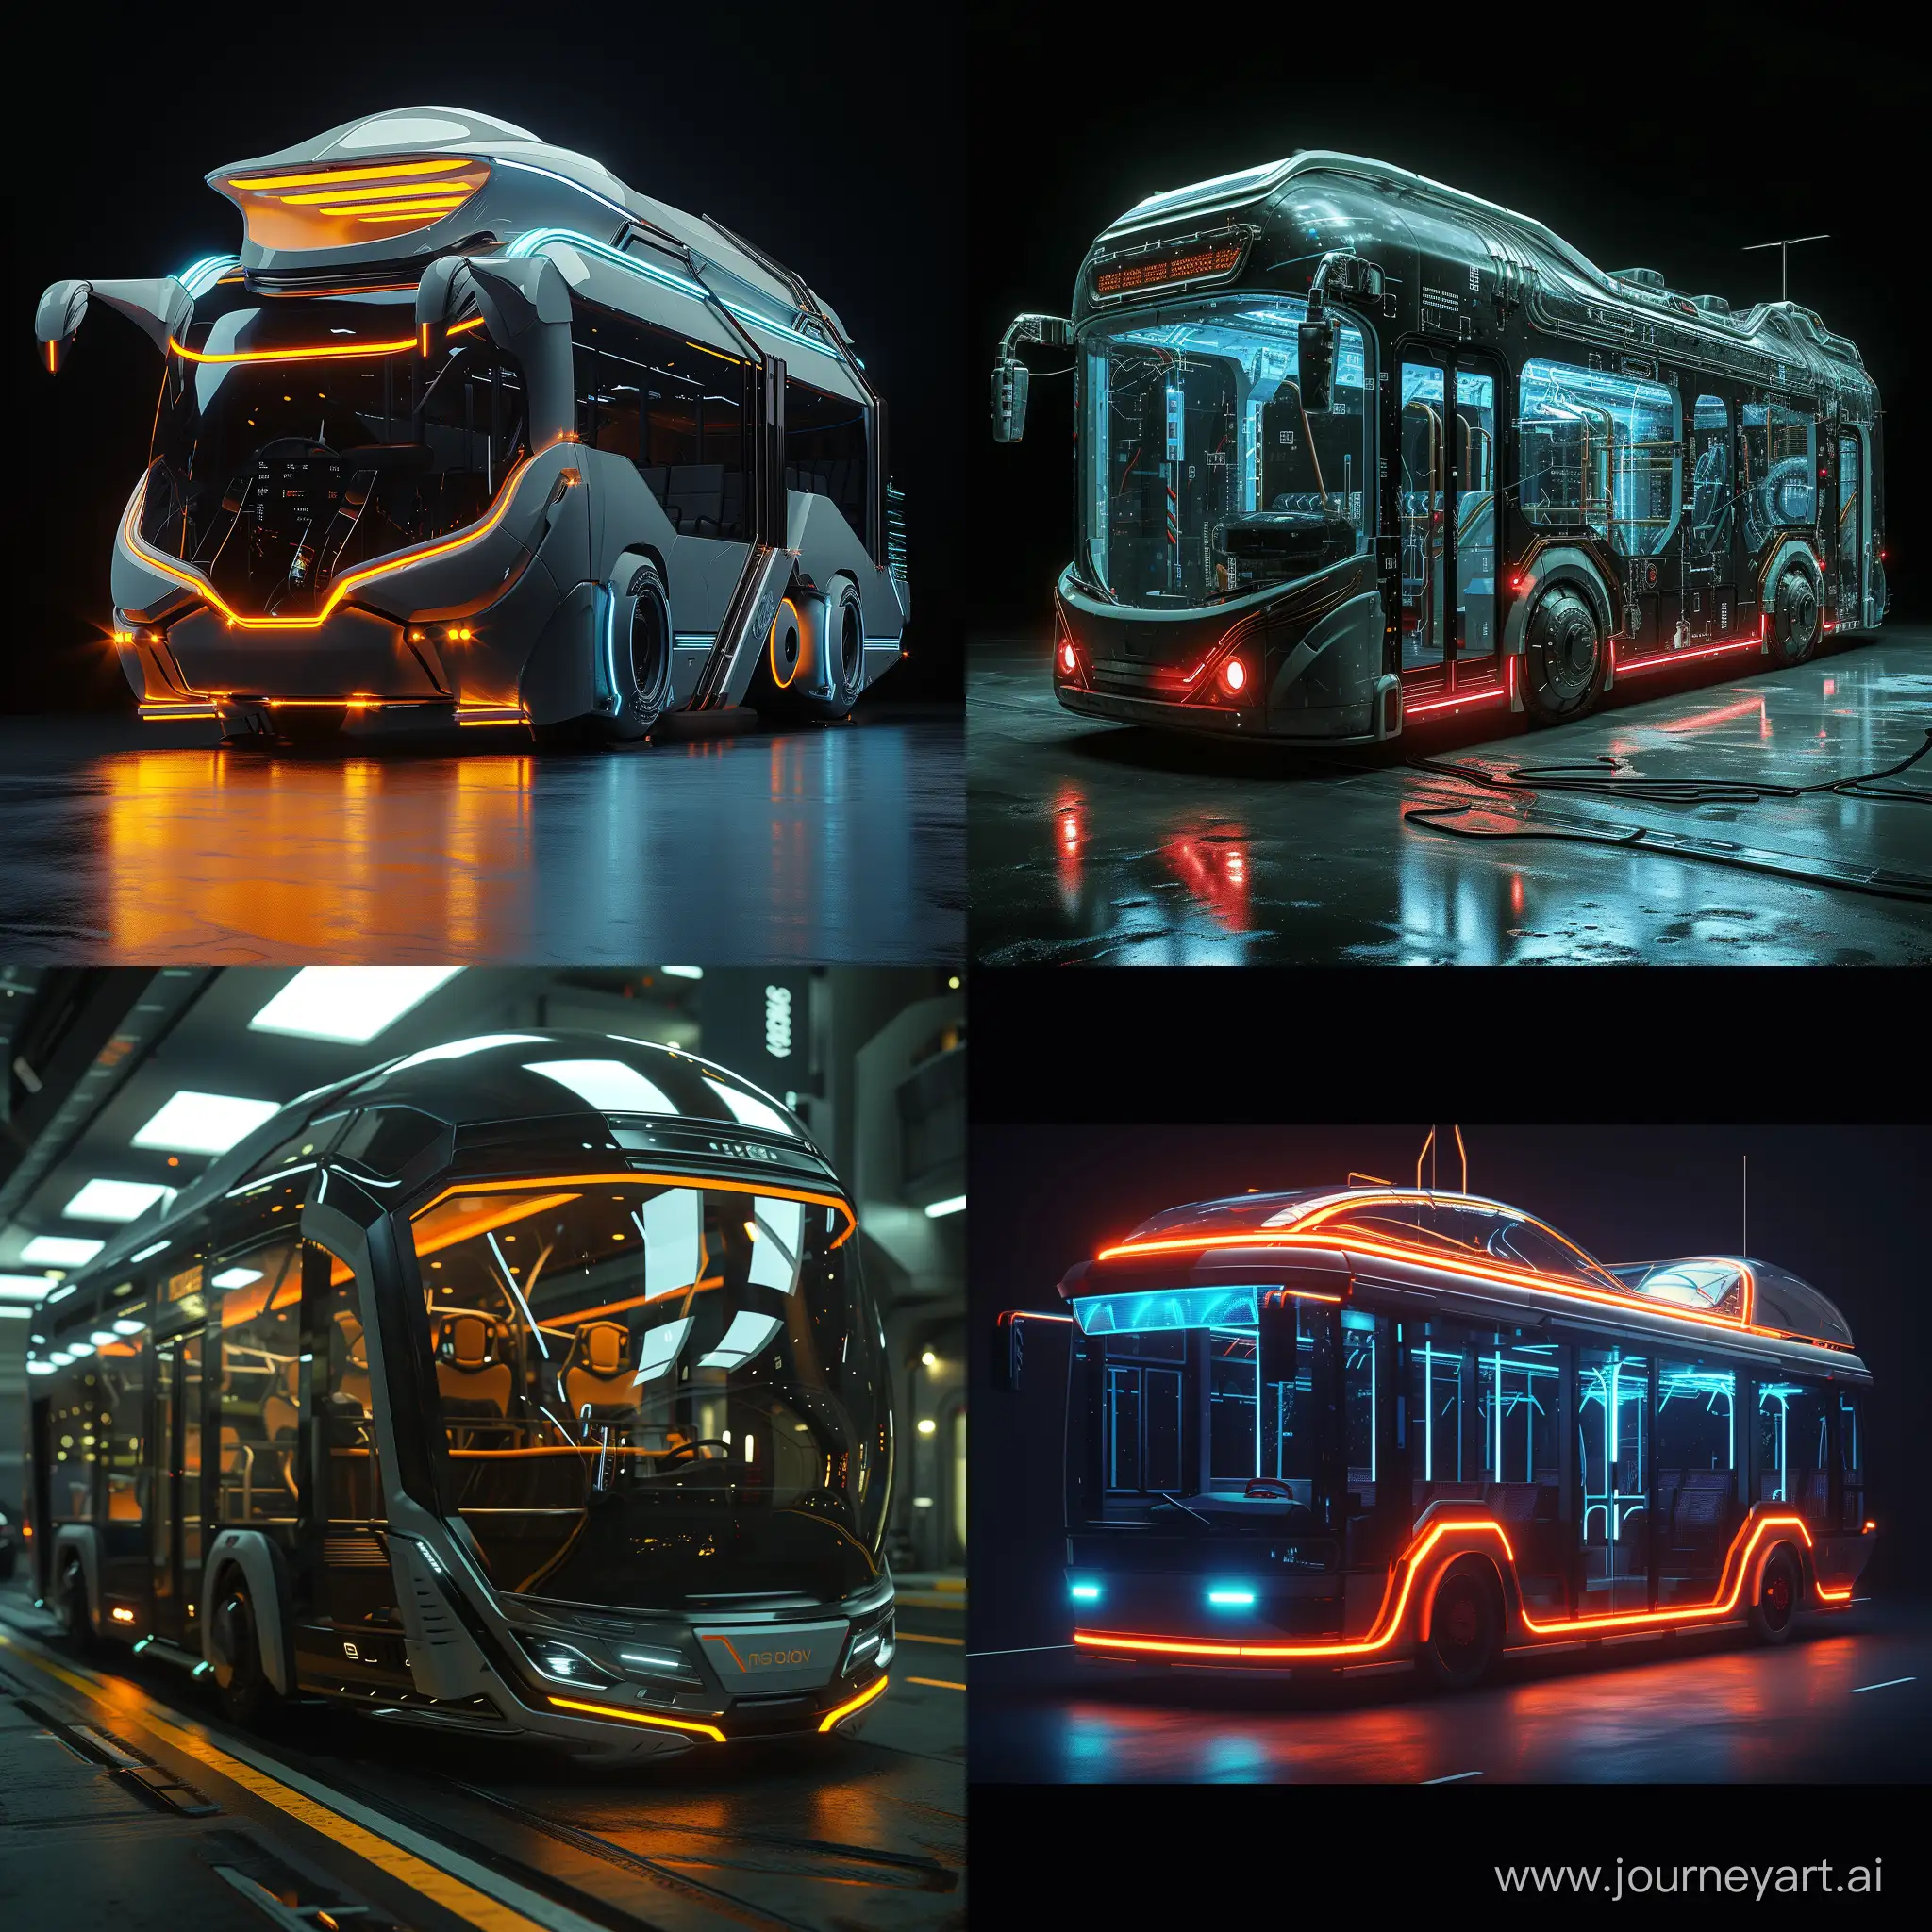 Futuristic-HighTech-Bus-in-Cinematic-Style